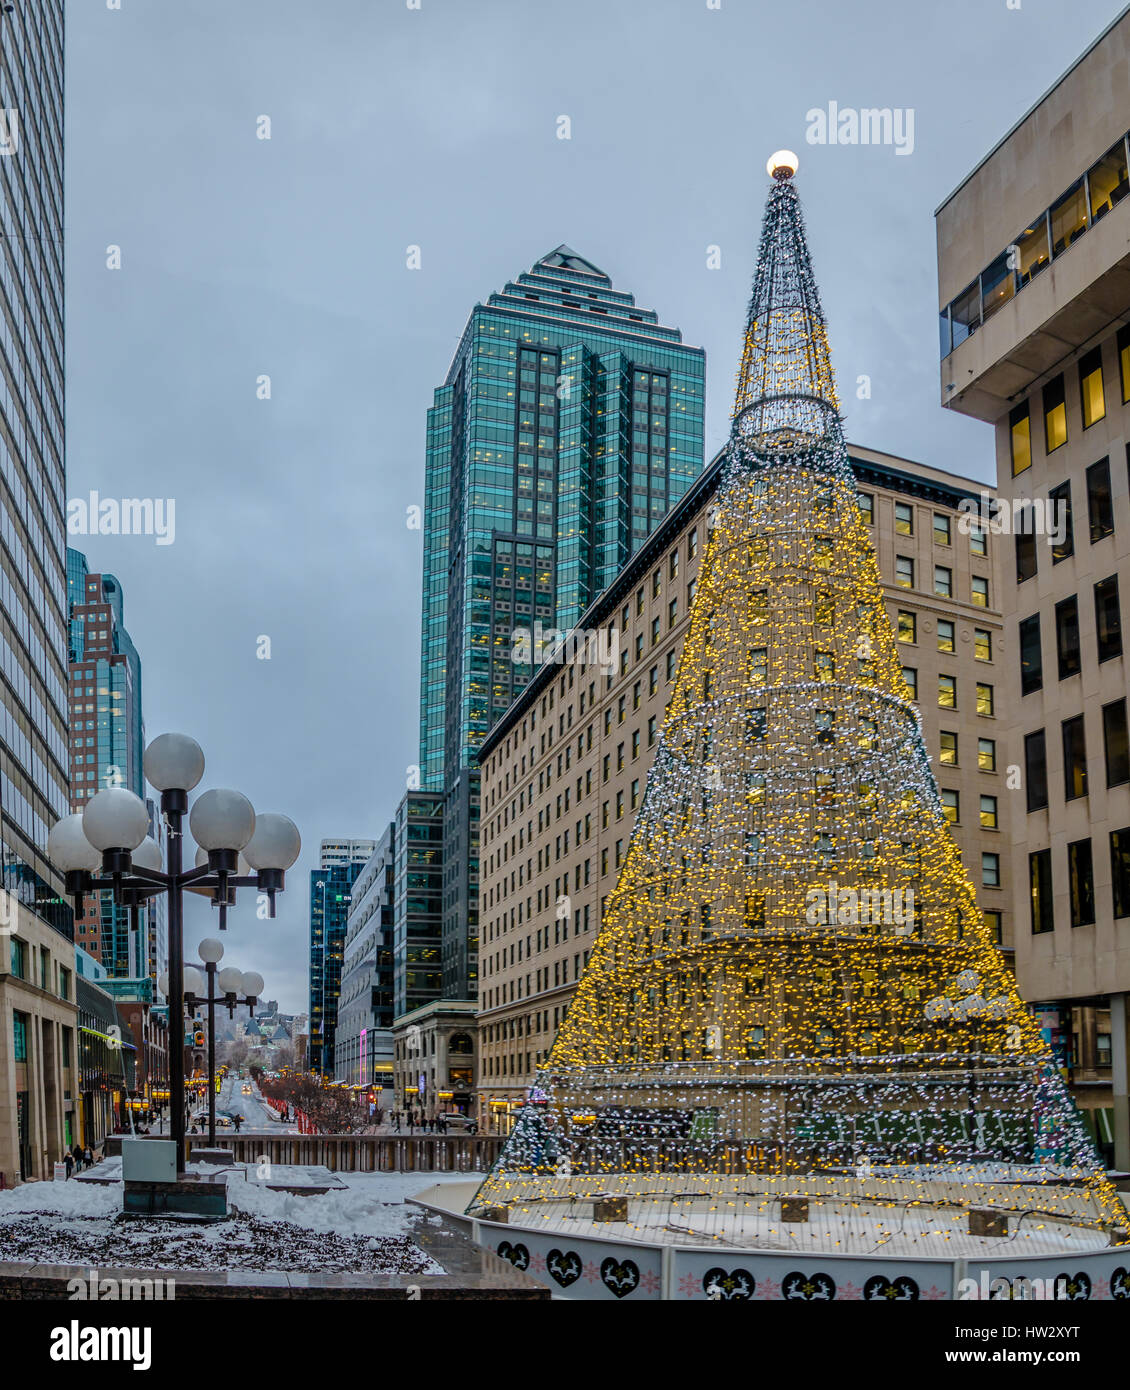 Illuminated Christmas Tree in Downtown Montreal - Quebec, Canada Stock Photo